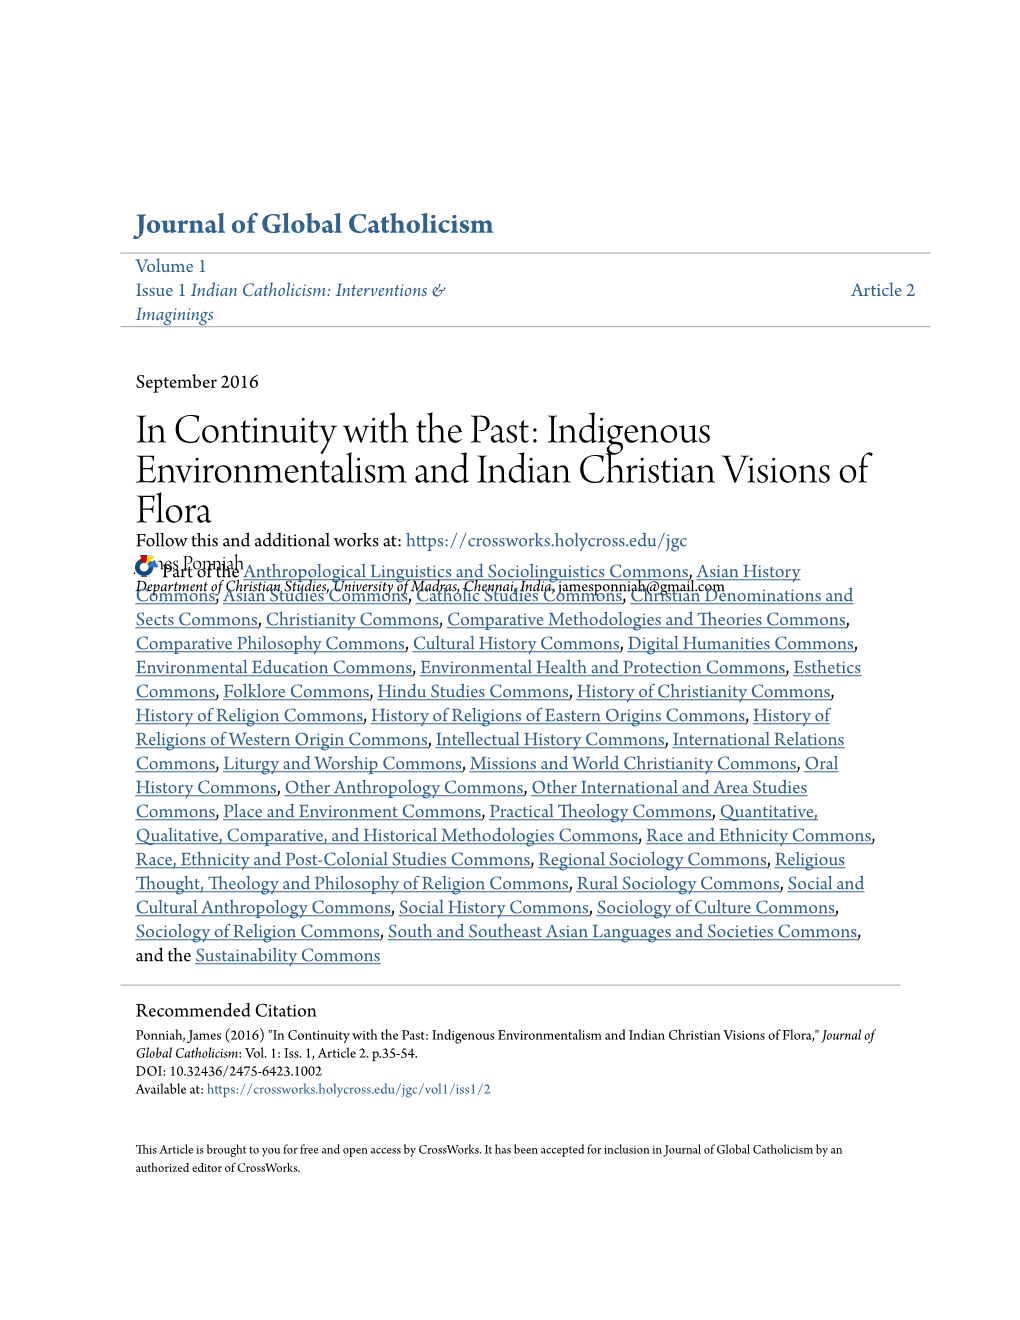 Indigenous Environmentalism and Indian Christian